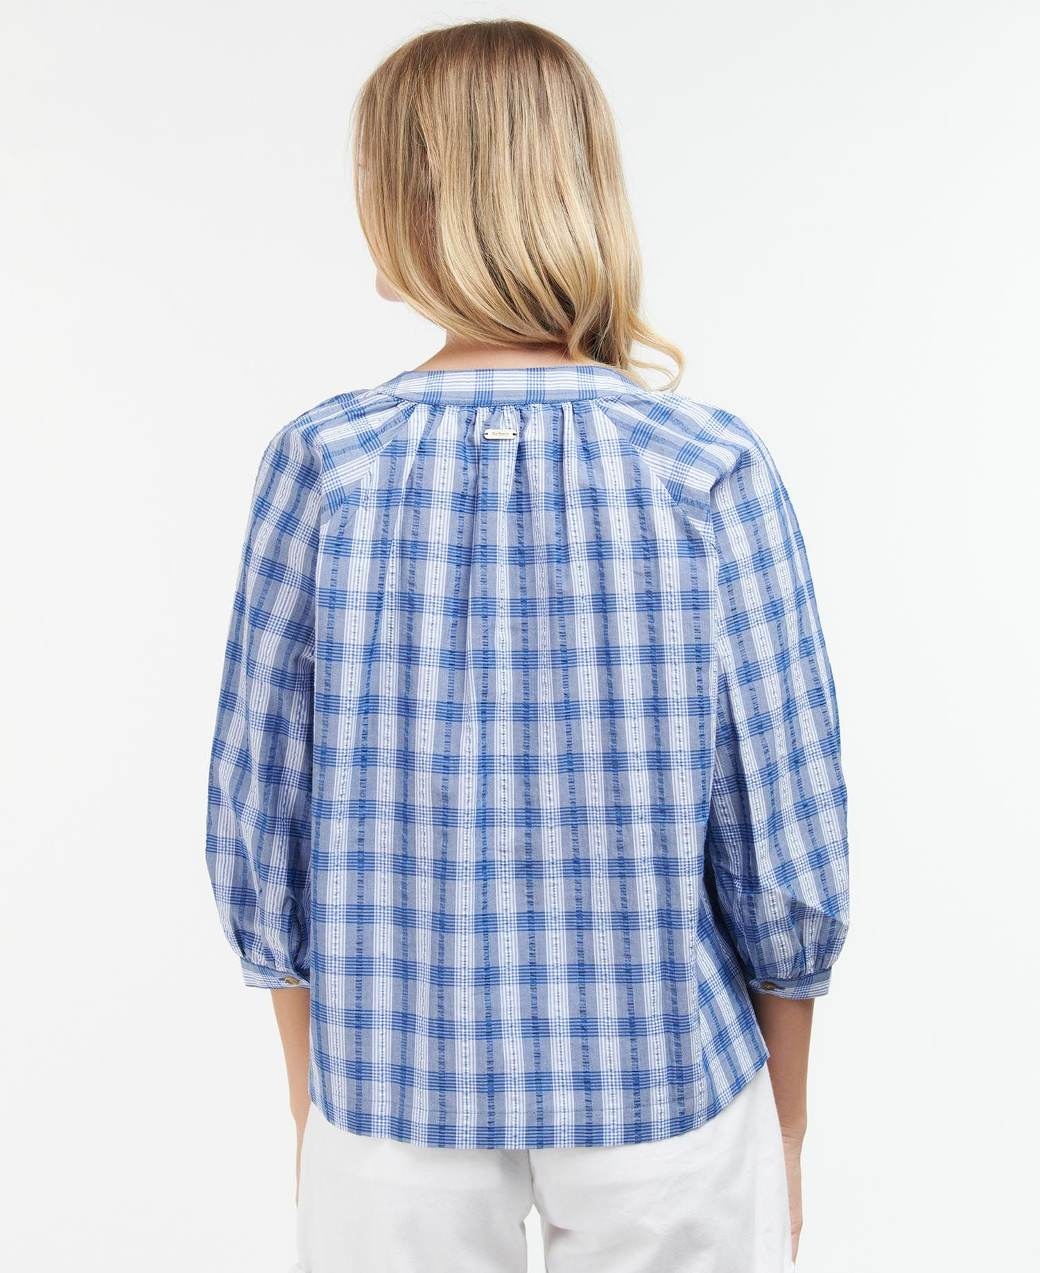 Barbour Renfew Top Bluebell Check-4